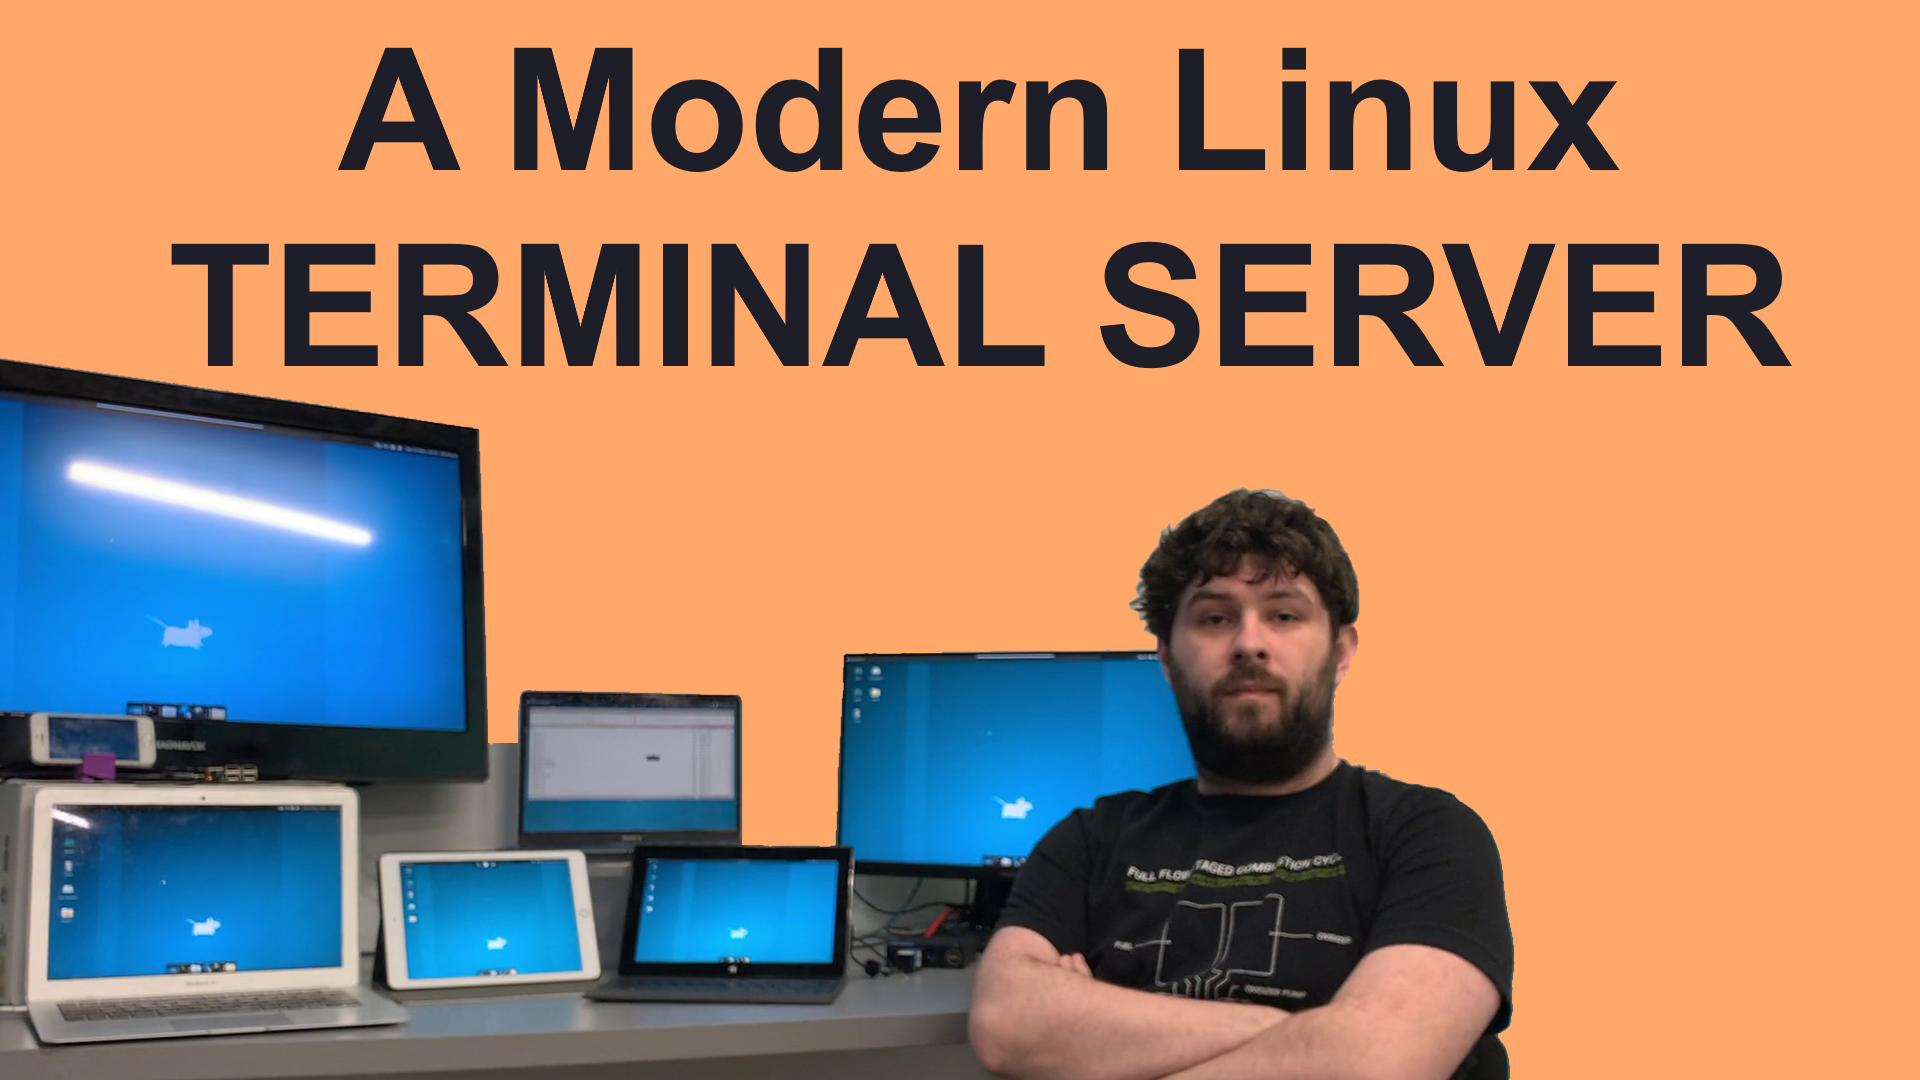 A Modern Linux Graphical Terminal Server